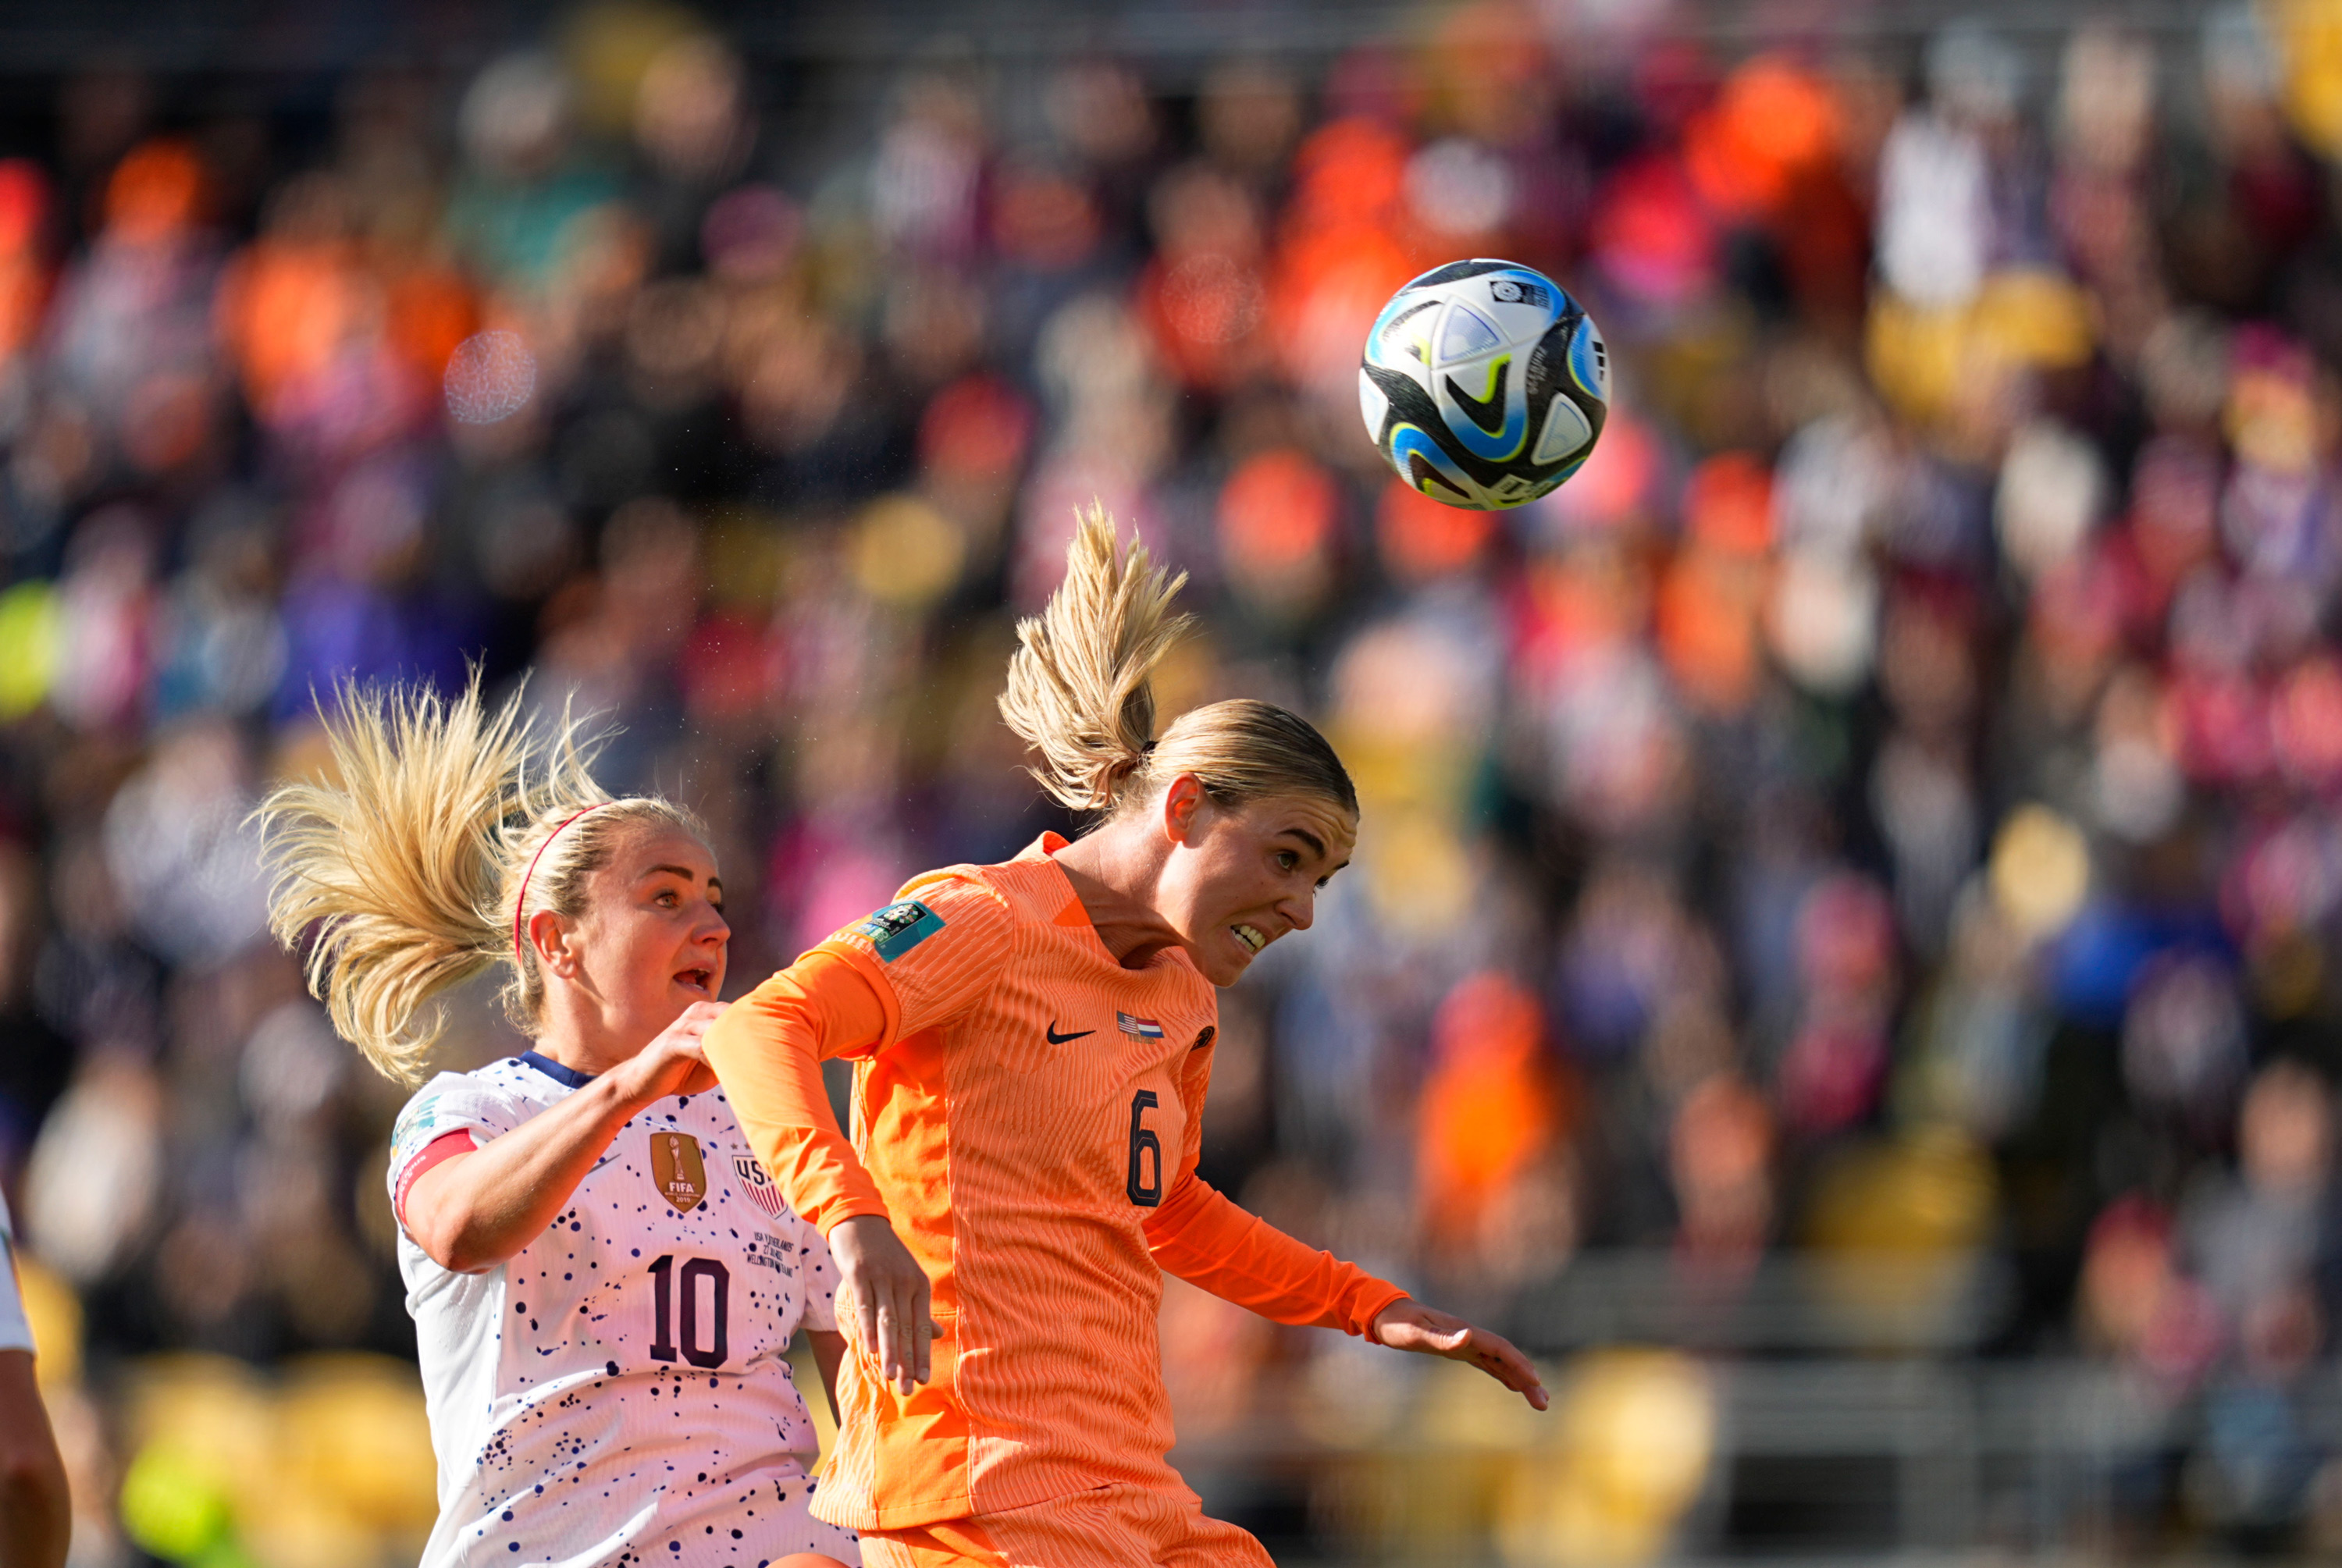 USA's Lindsey Horan and Netherlands' Jill Roord battle for the ball during their match on July 27. USA and Netherlands tied 1-1.